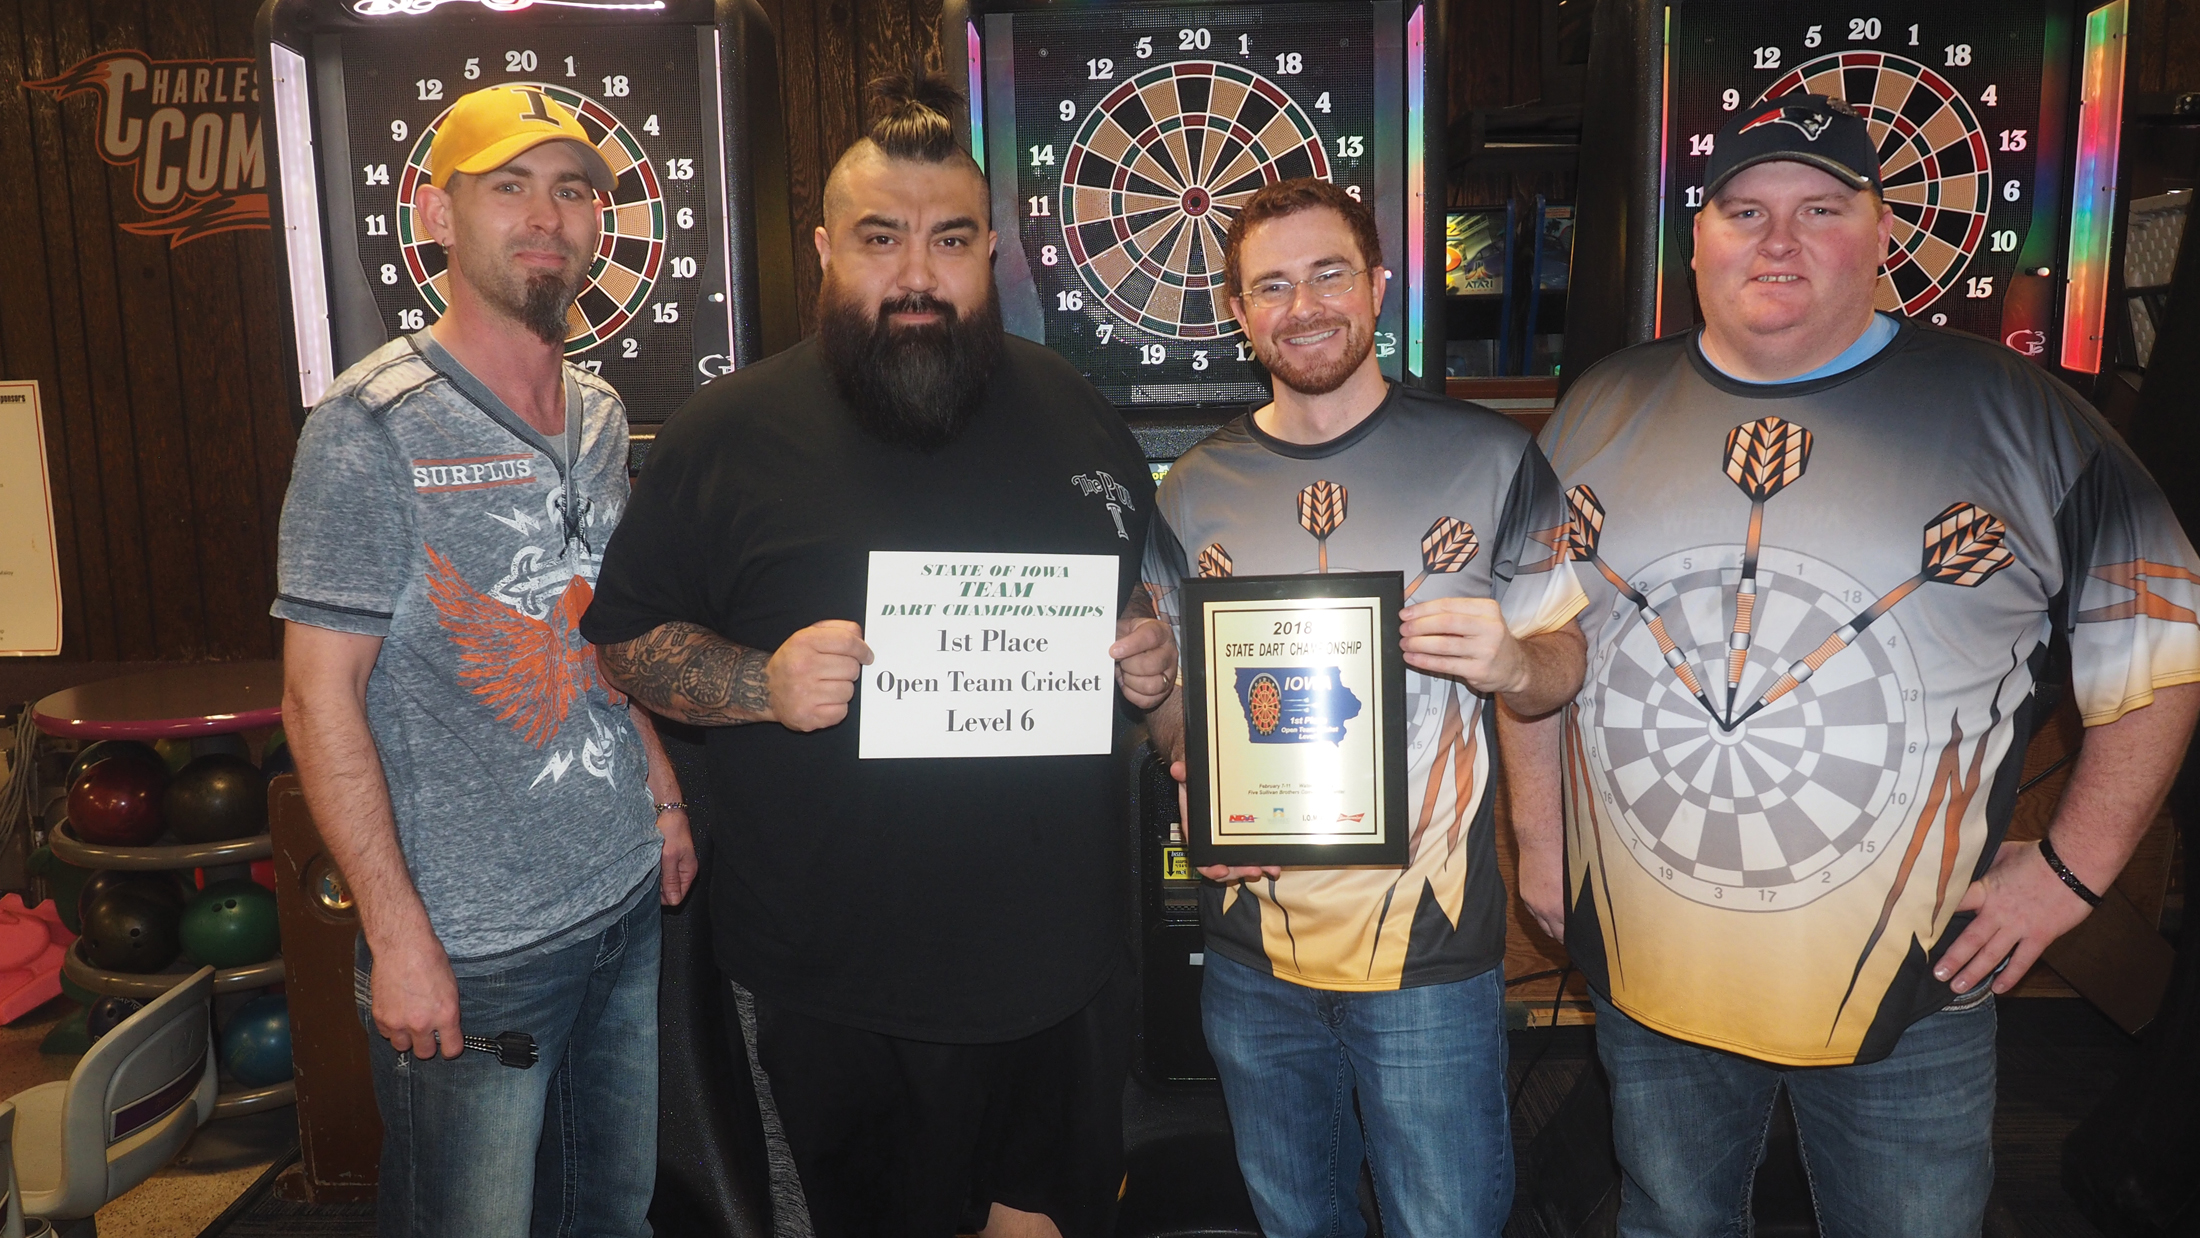 Charles City Dart League players pull some ‘tricks’ at state tourney